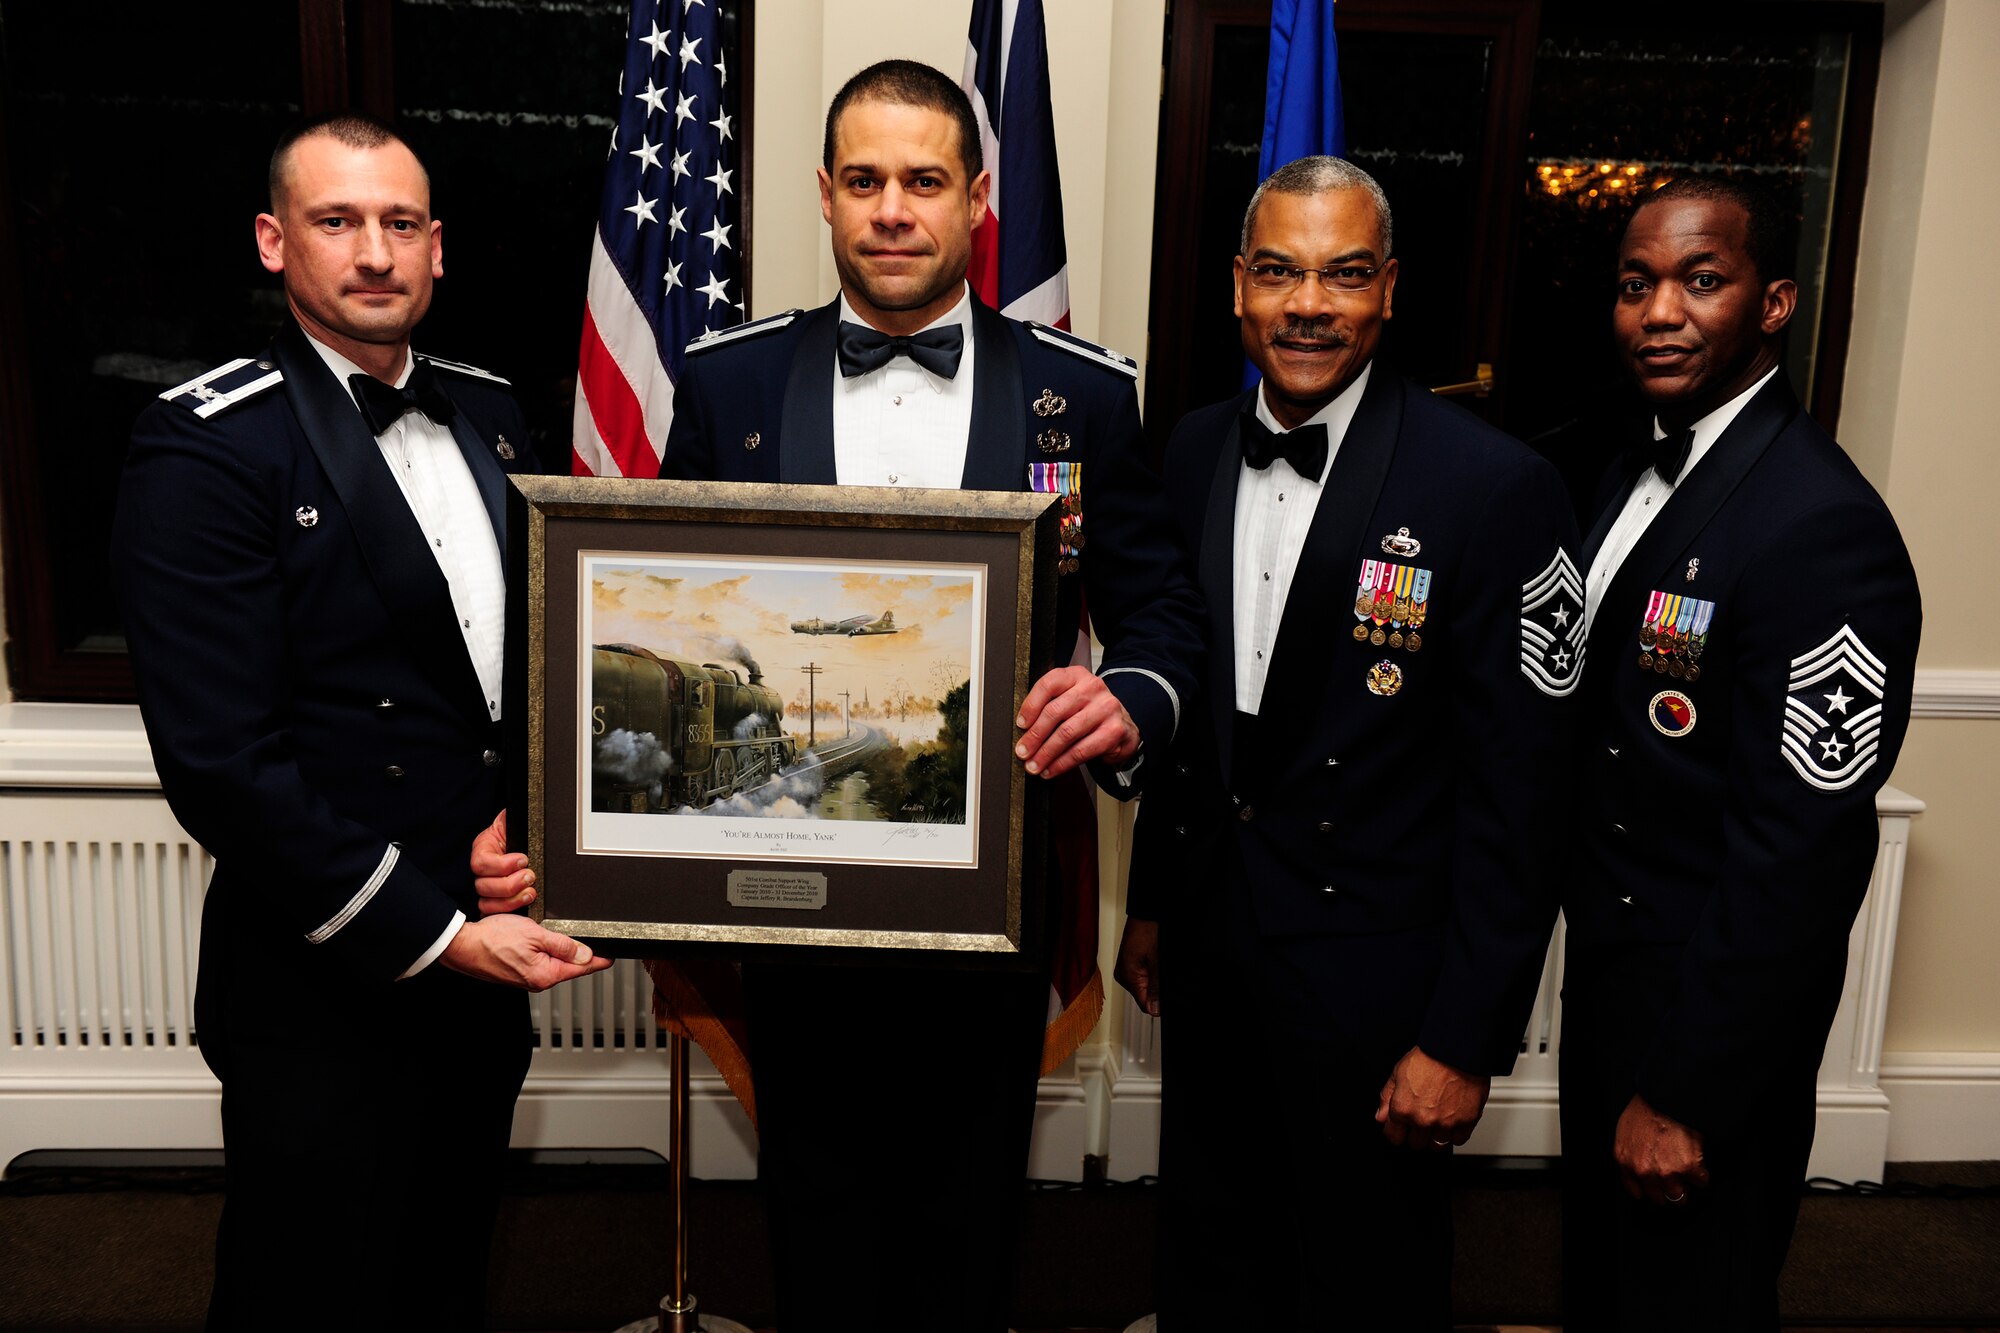 RAF ALCONBURY, United Kingdom - Lt. Col. Jose Rivera accepts the Company Grade Officer of the Year Award on behalf of Capt. Jeffery Brandenburg during the 501st Combat Support Wing Annual Awards Ceremony Feb. 4 at RAF Alconbury. Captain Brandenburg, who is assigned to the 422nd Civil Engineer Squadron, is currently deployed. (U.S. Air Force photo by Tech. Sgt. John Barton)